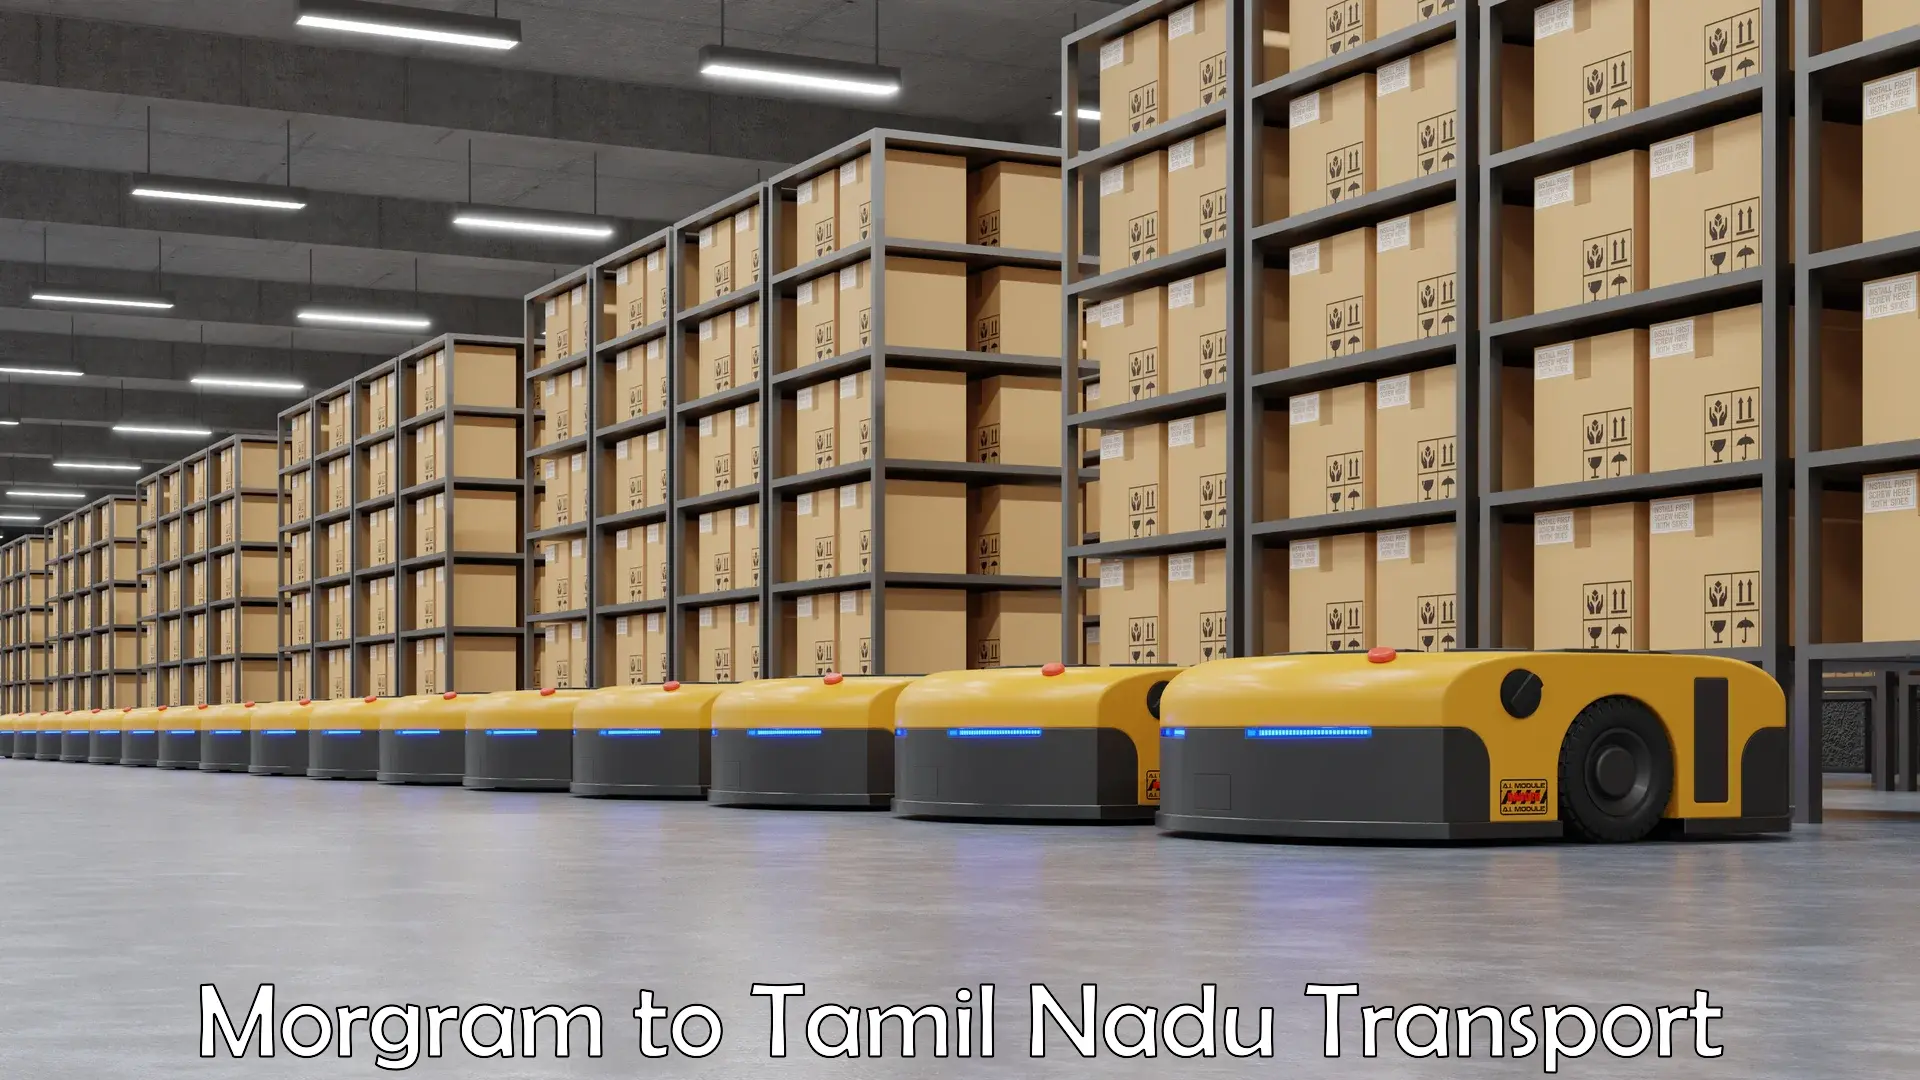 Goods delivery service Morgram to Tirupur